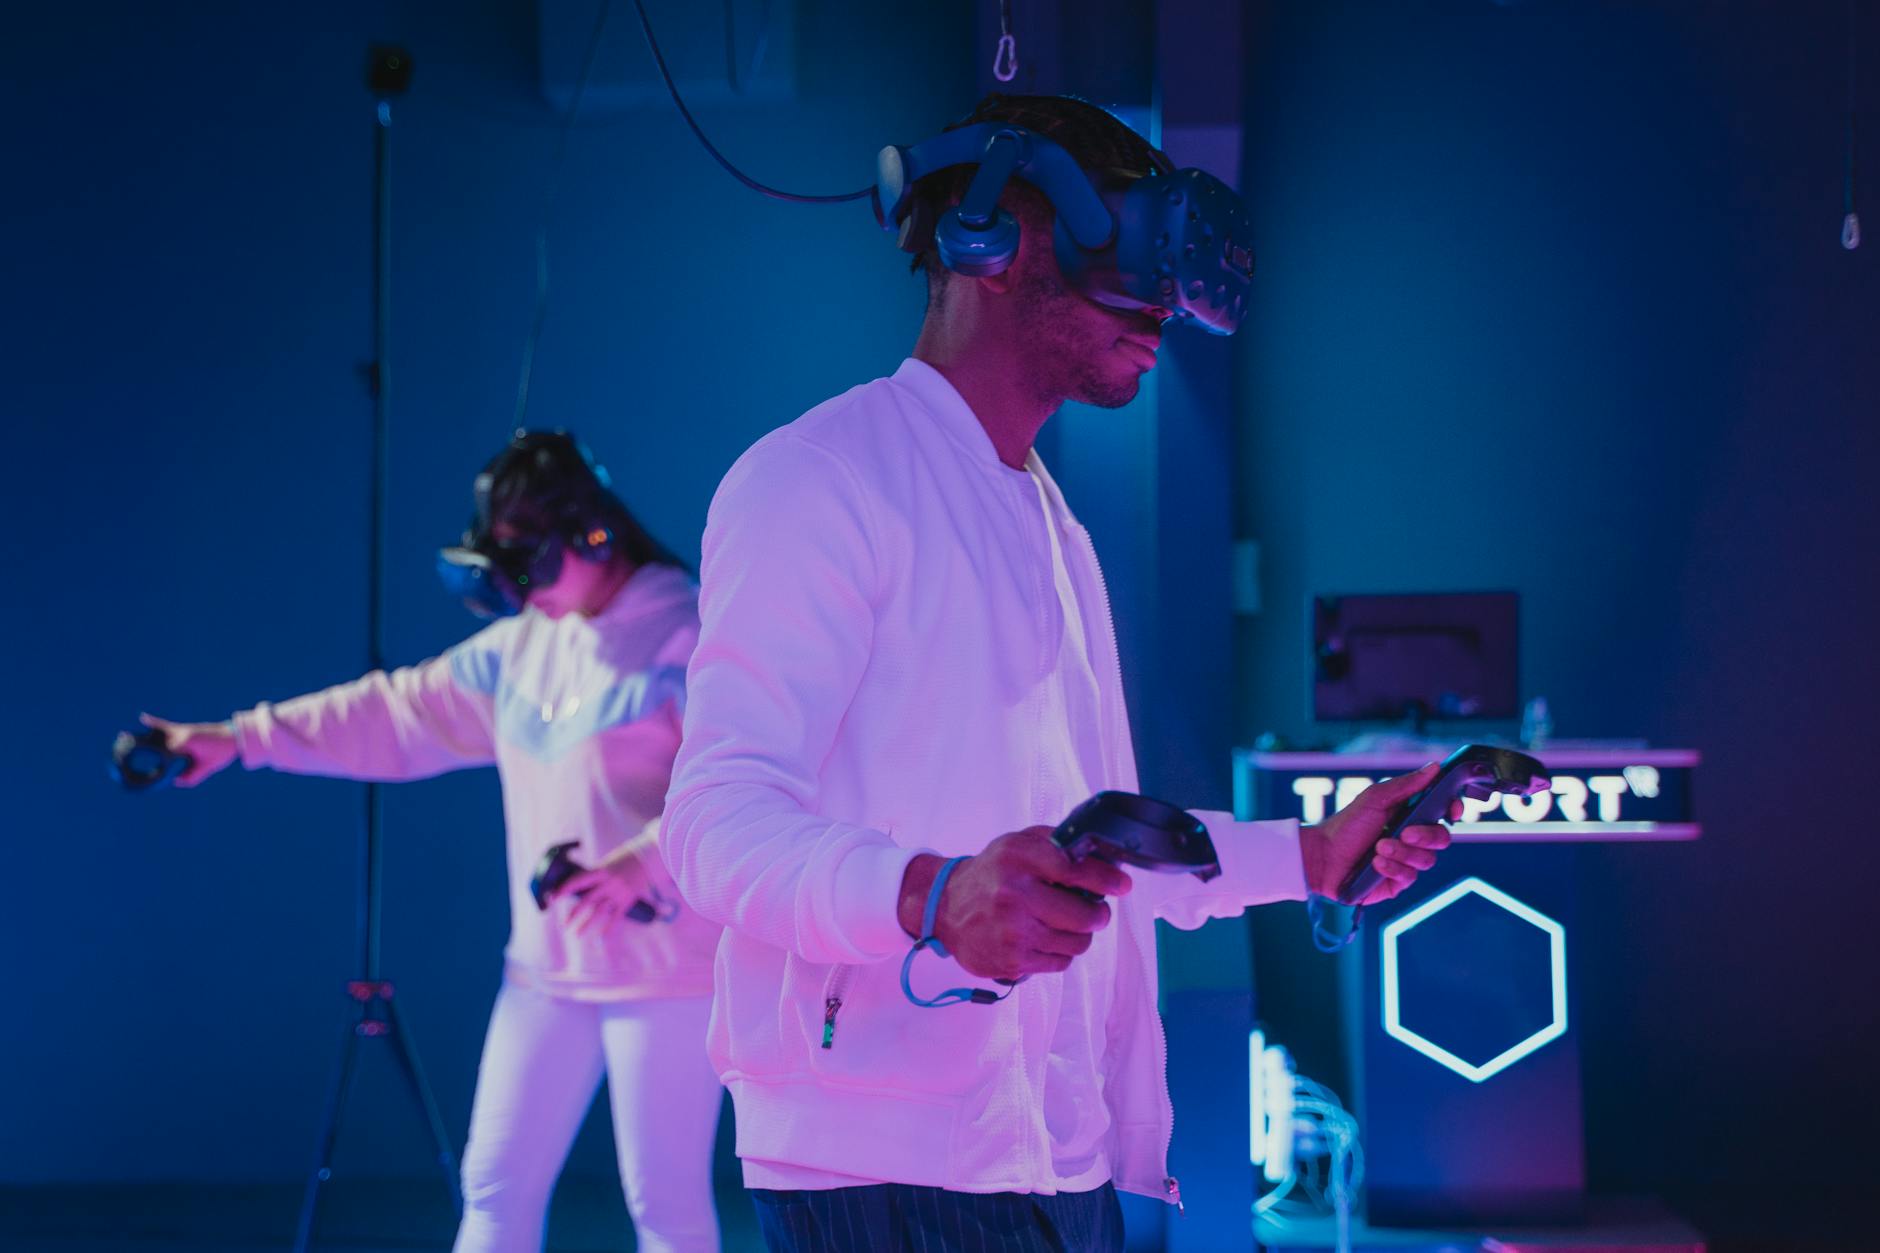 Man Playing a Video Game while Wearing a VR Headset